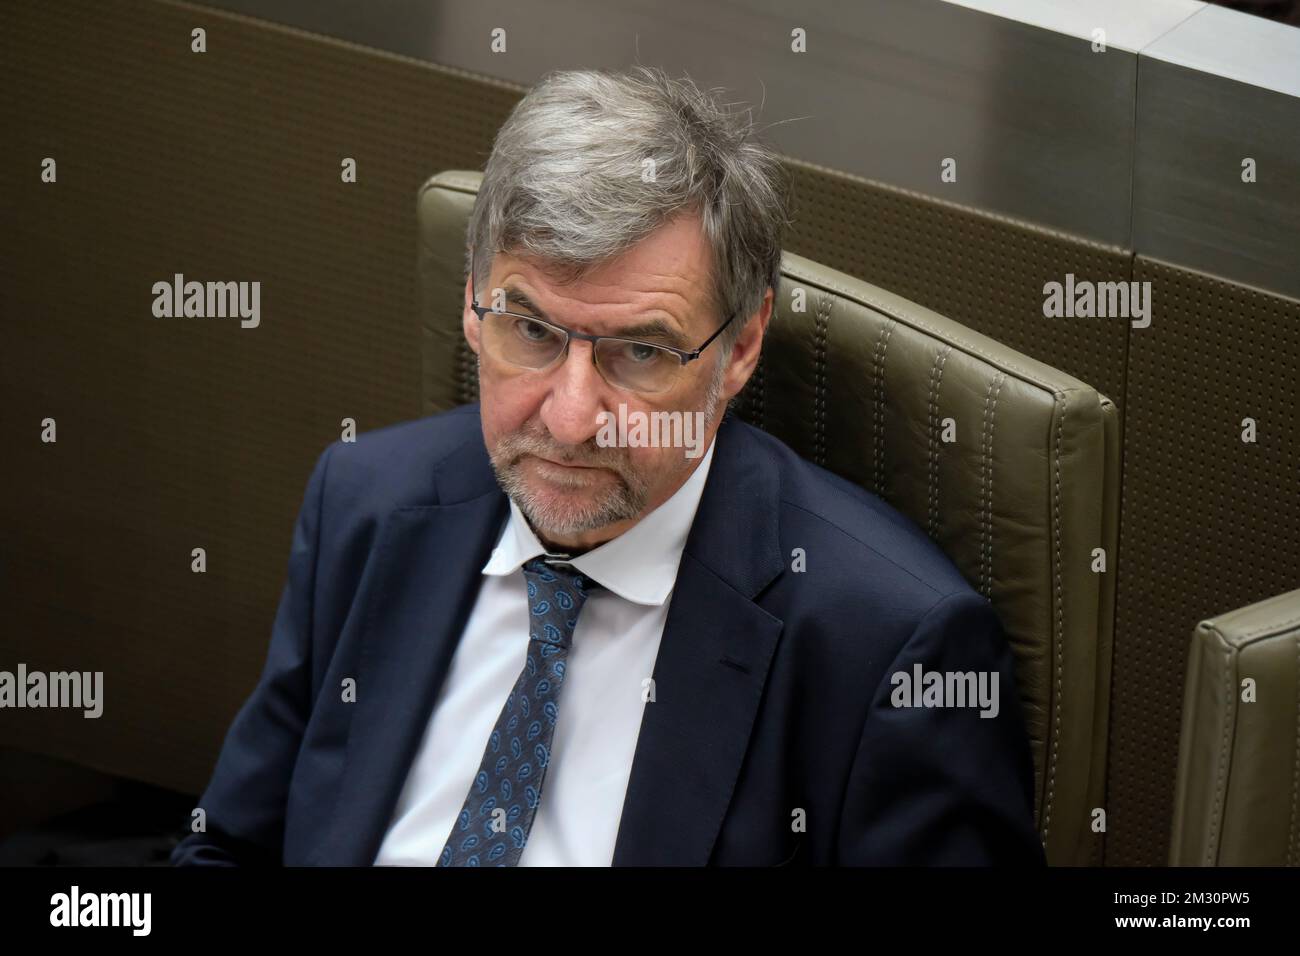 N-VA's group chairman Wilfried Vandaele pictured during a plenary session of the Flemish Parliament in Brussels, Friday 04 October 2019. The parliament will debate on the government declaration that was presented by the newly formed Flemish government. Opposition parties want to receive detailed numbers concerning the budget. BELGA PHOTO NICOLAS MAETERLINCK Stock Photo